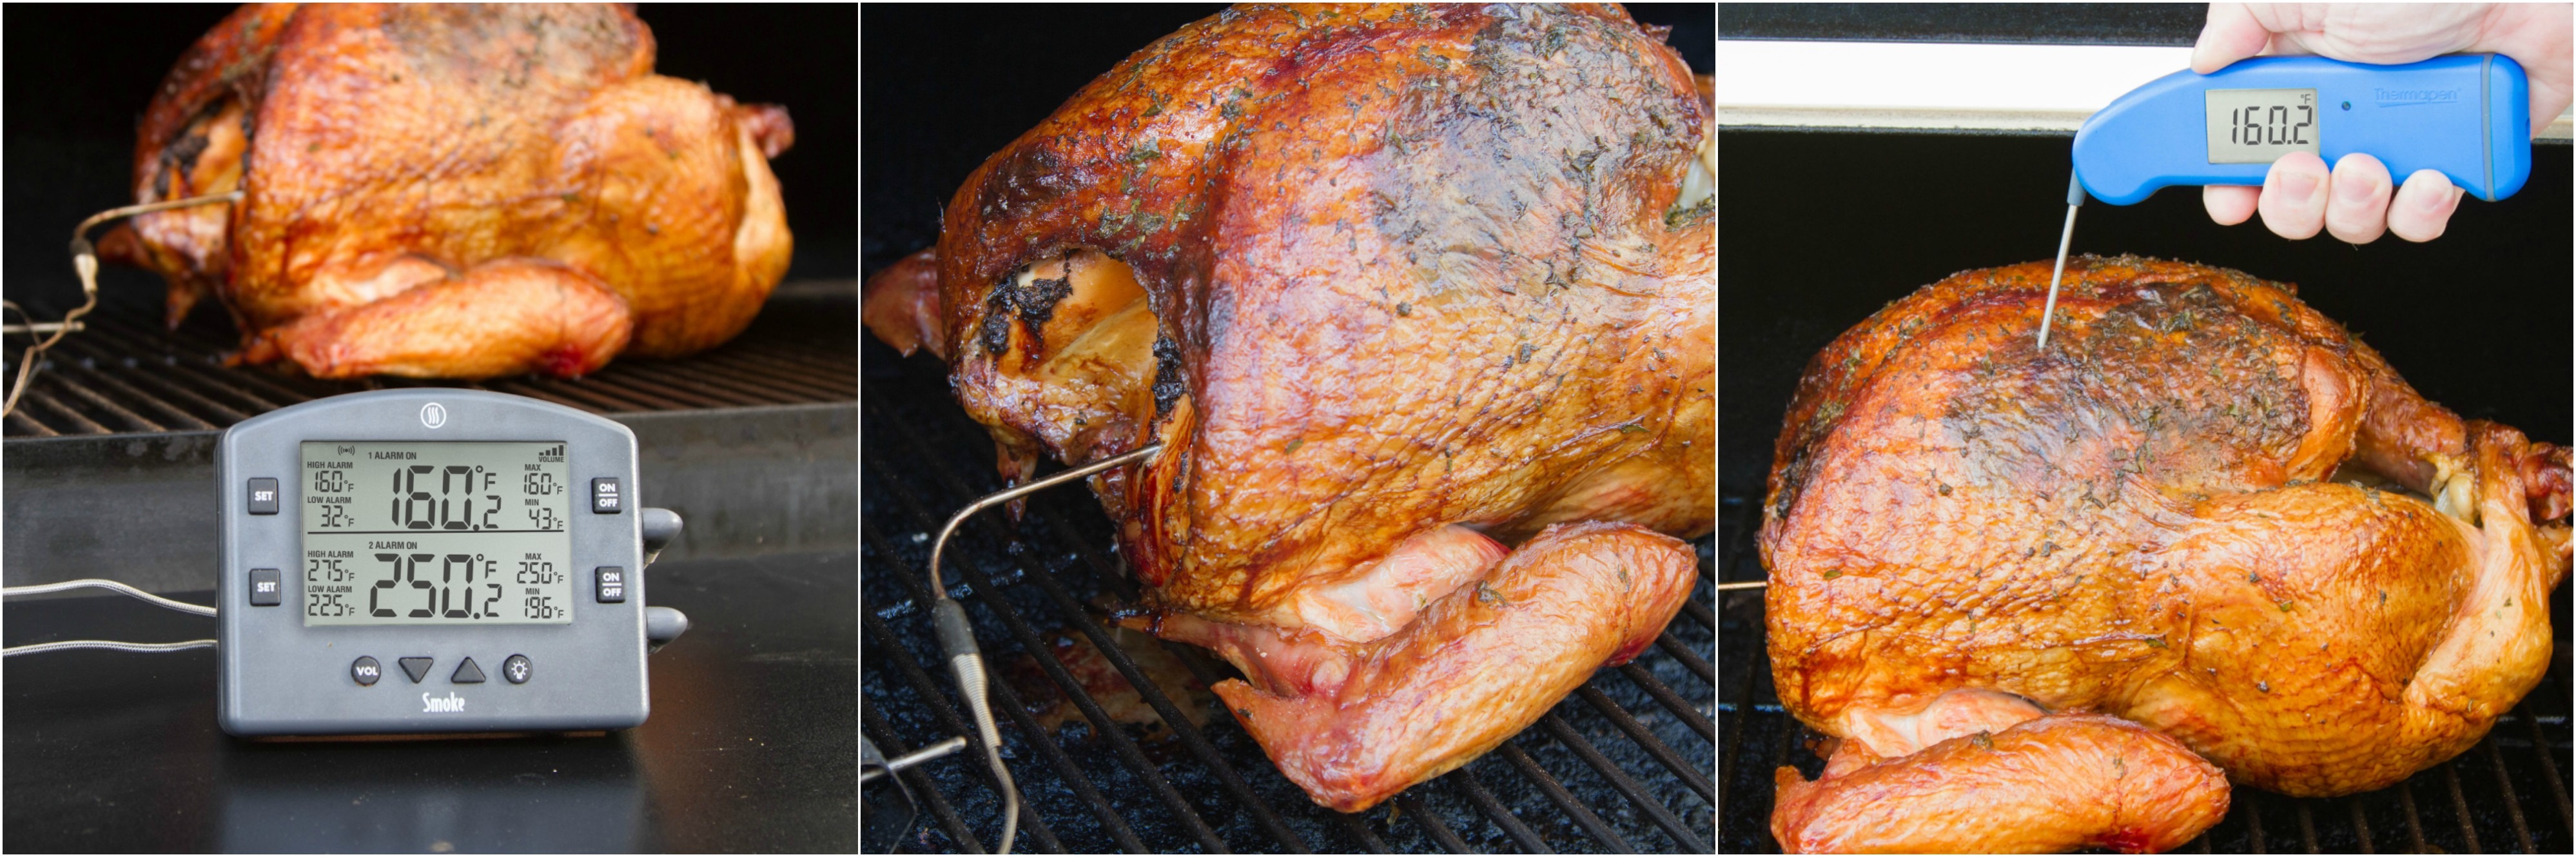 verify the smoked turkey's temperature with an instant read thermometer